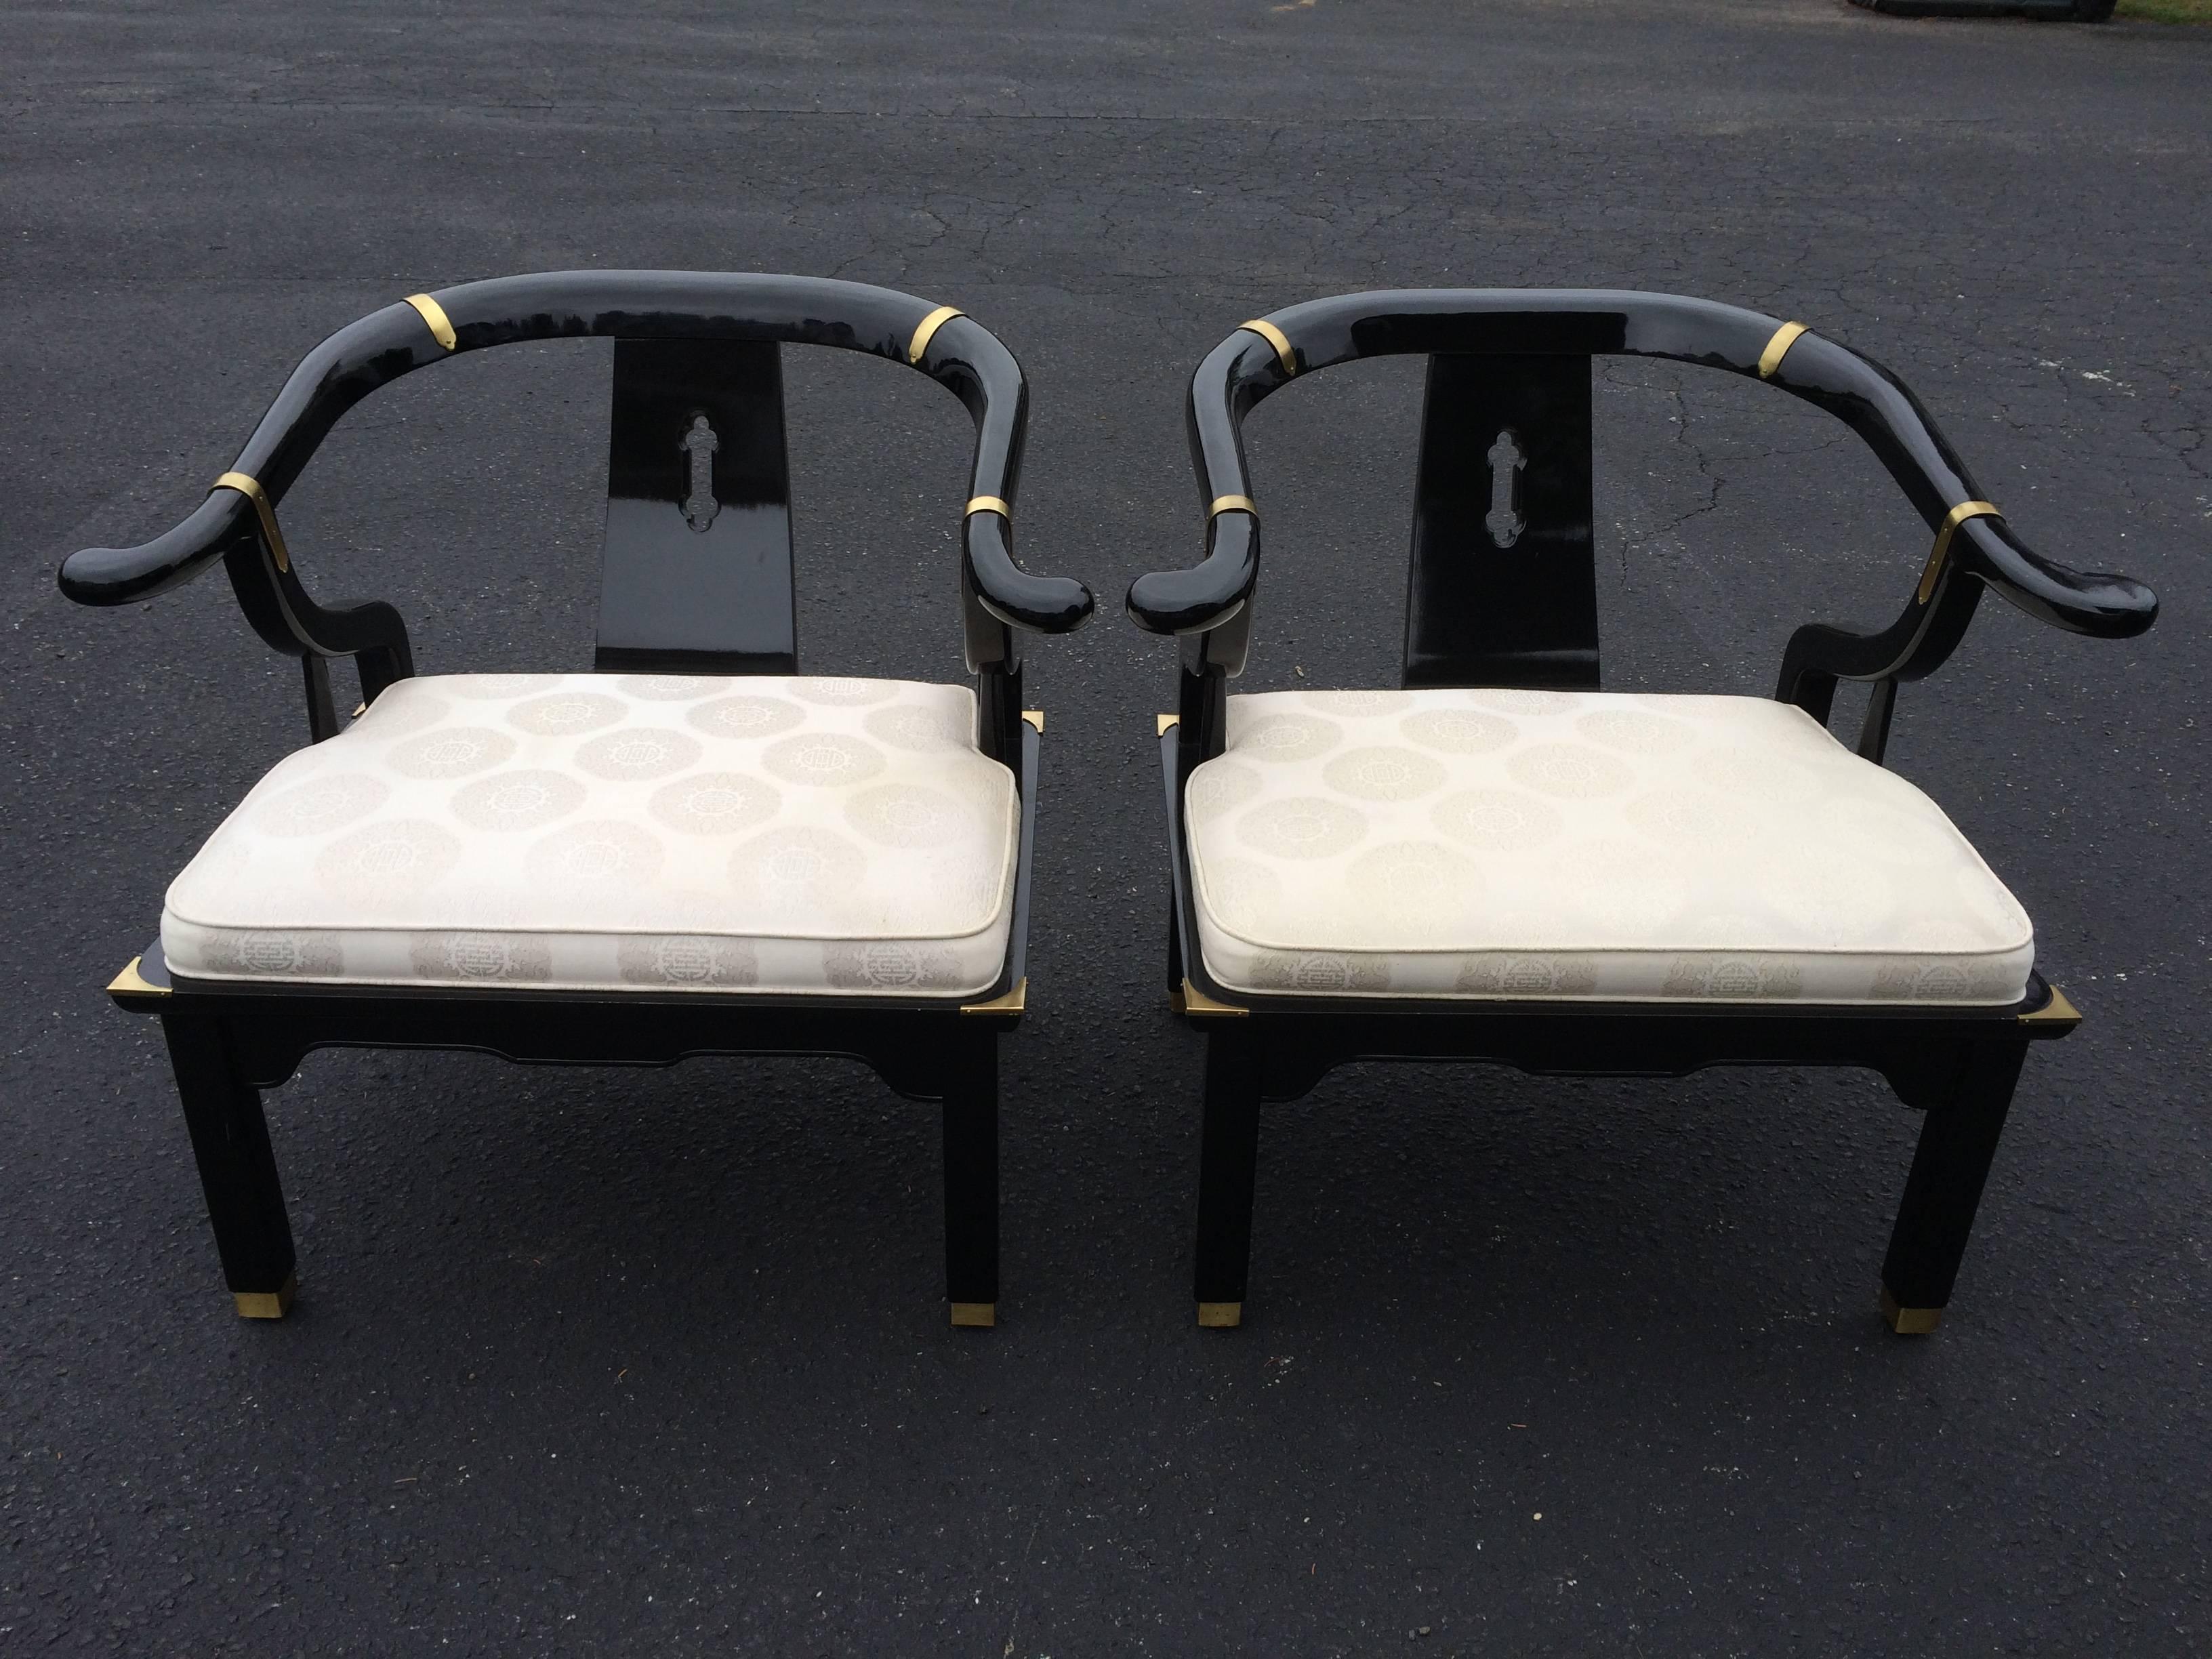 Original condition Pair of Century Asian black lacquered and brass chairs.  Style of James Mont
 Beautiful detail and design to this iconic pair of chairs. Some wear to lacquer on chair back
Ivory damask seat upholstery. 29.5 in.Hx31 in.W x 25 in.D.